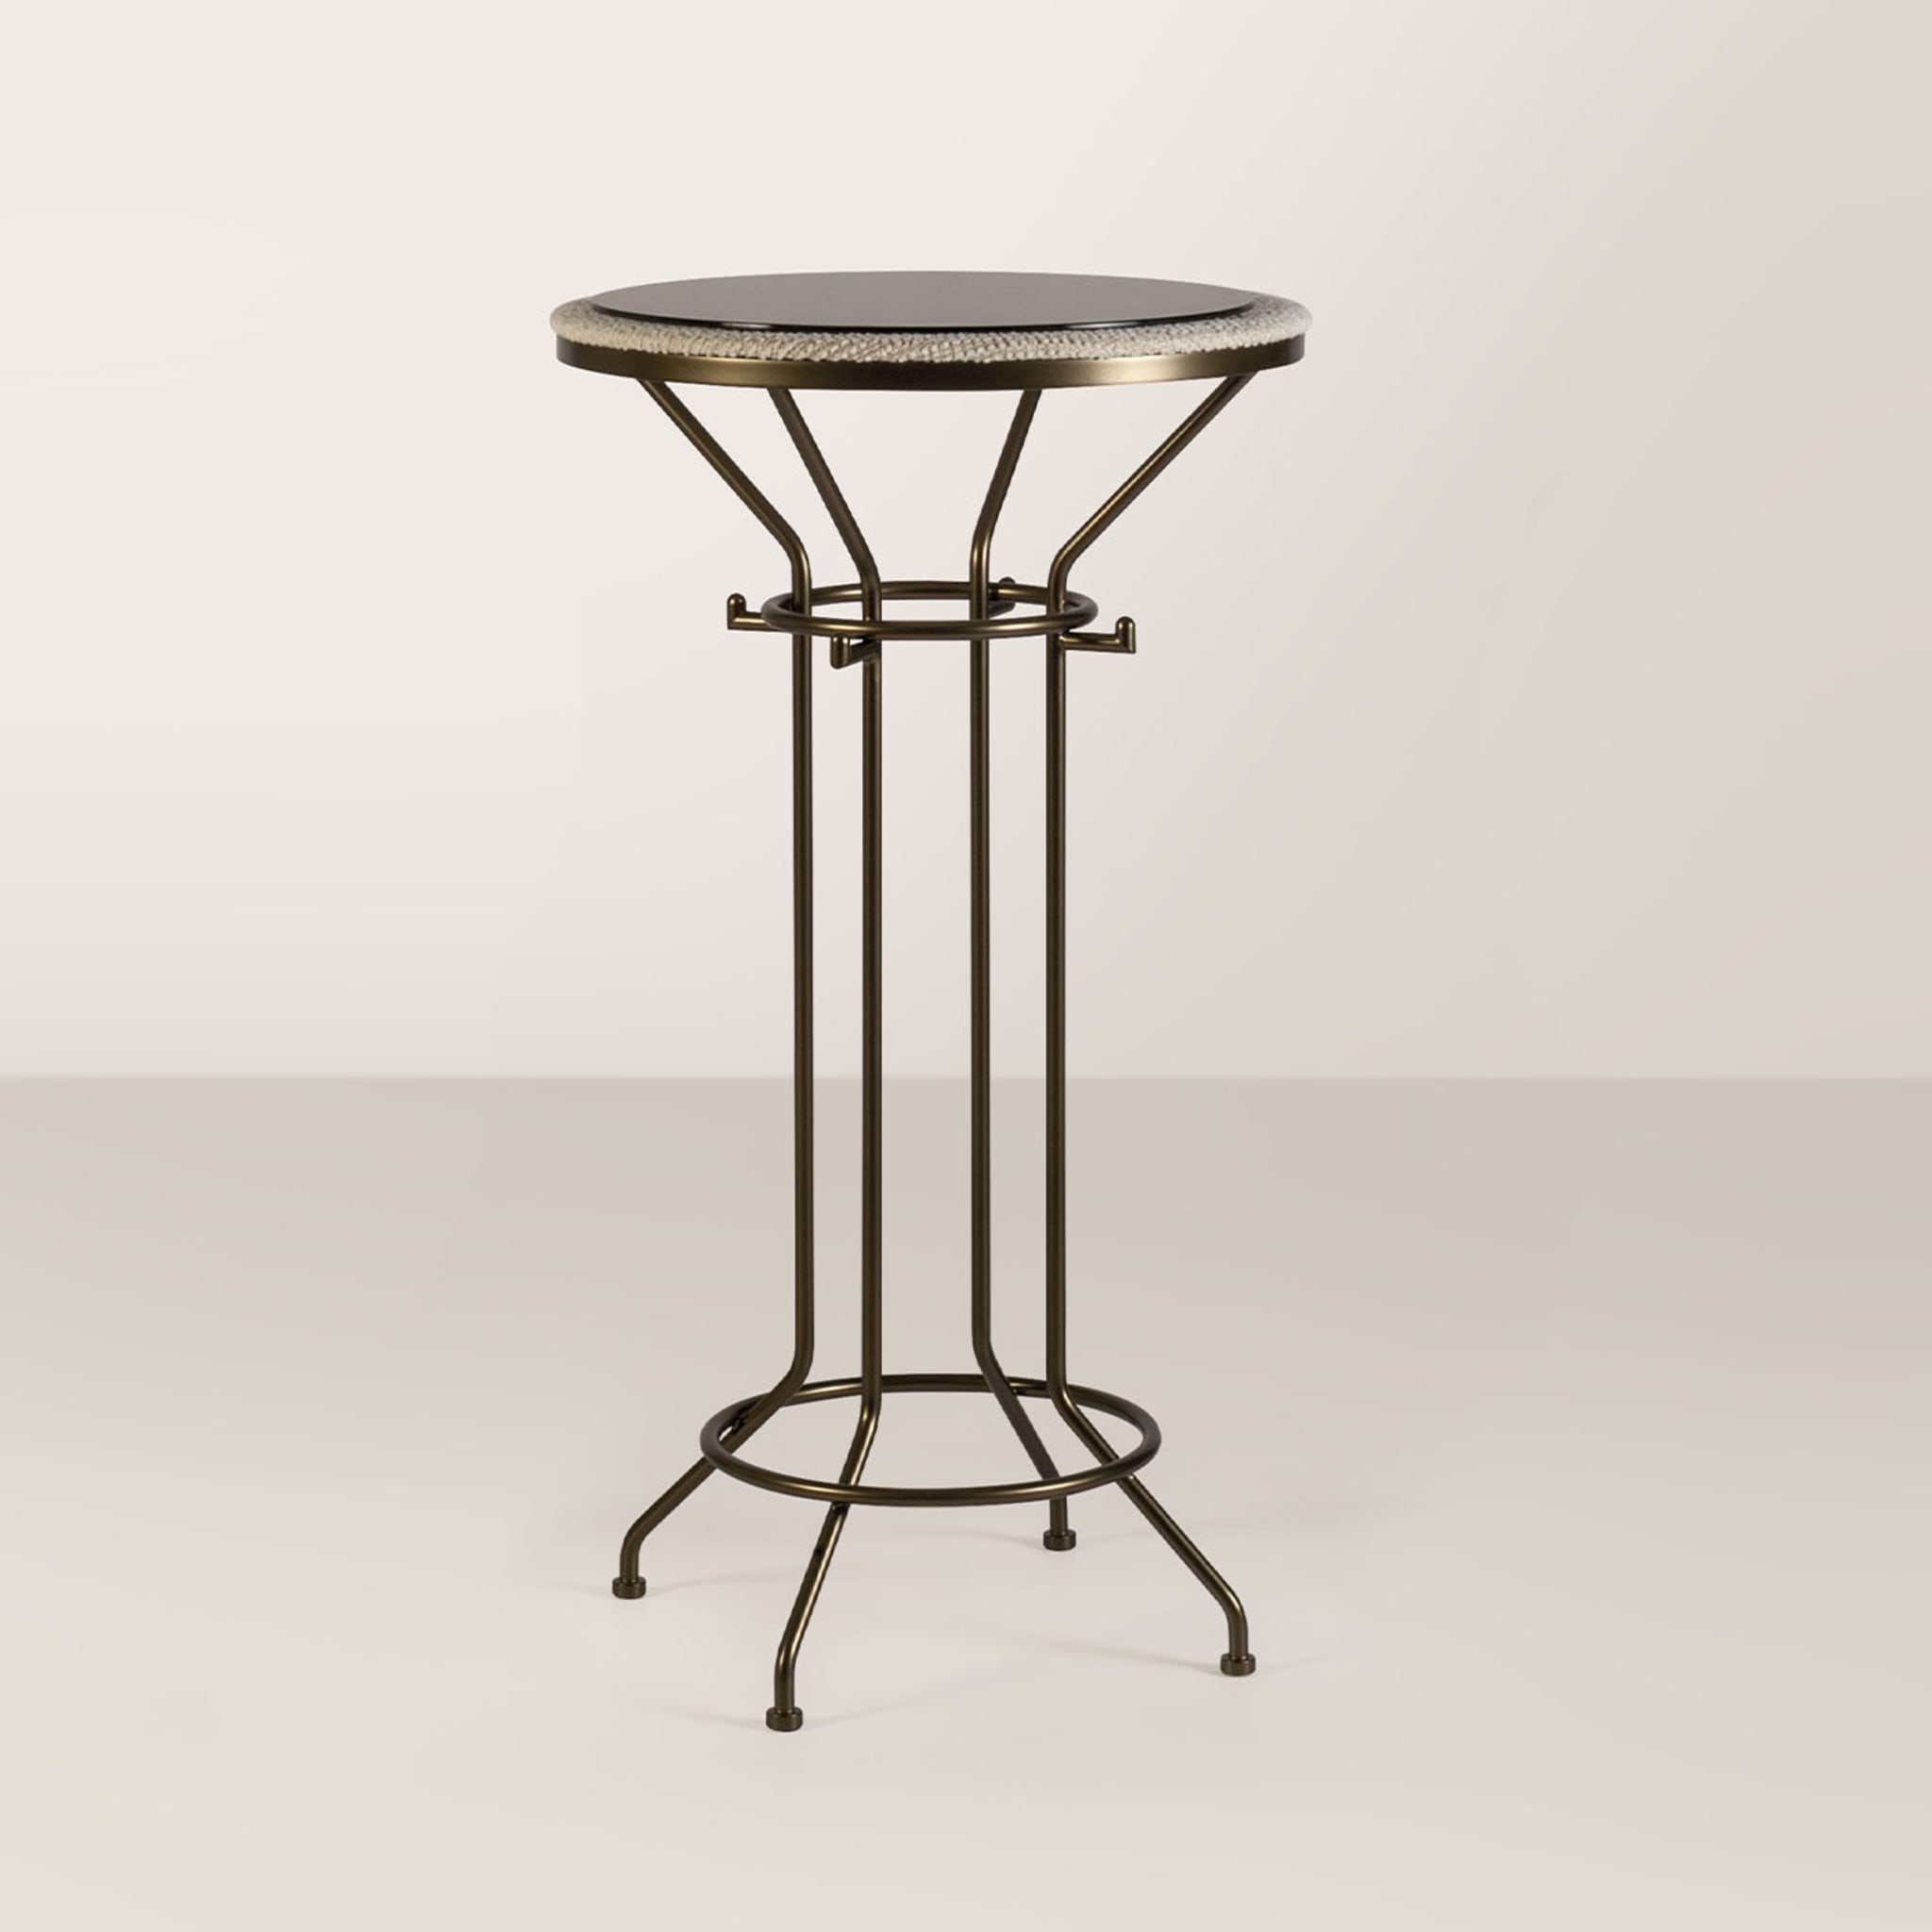 Back to Bronze High Bistro Table - Alternative view 2